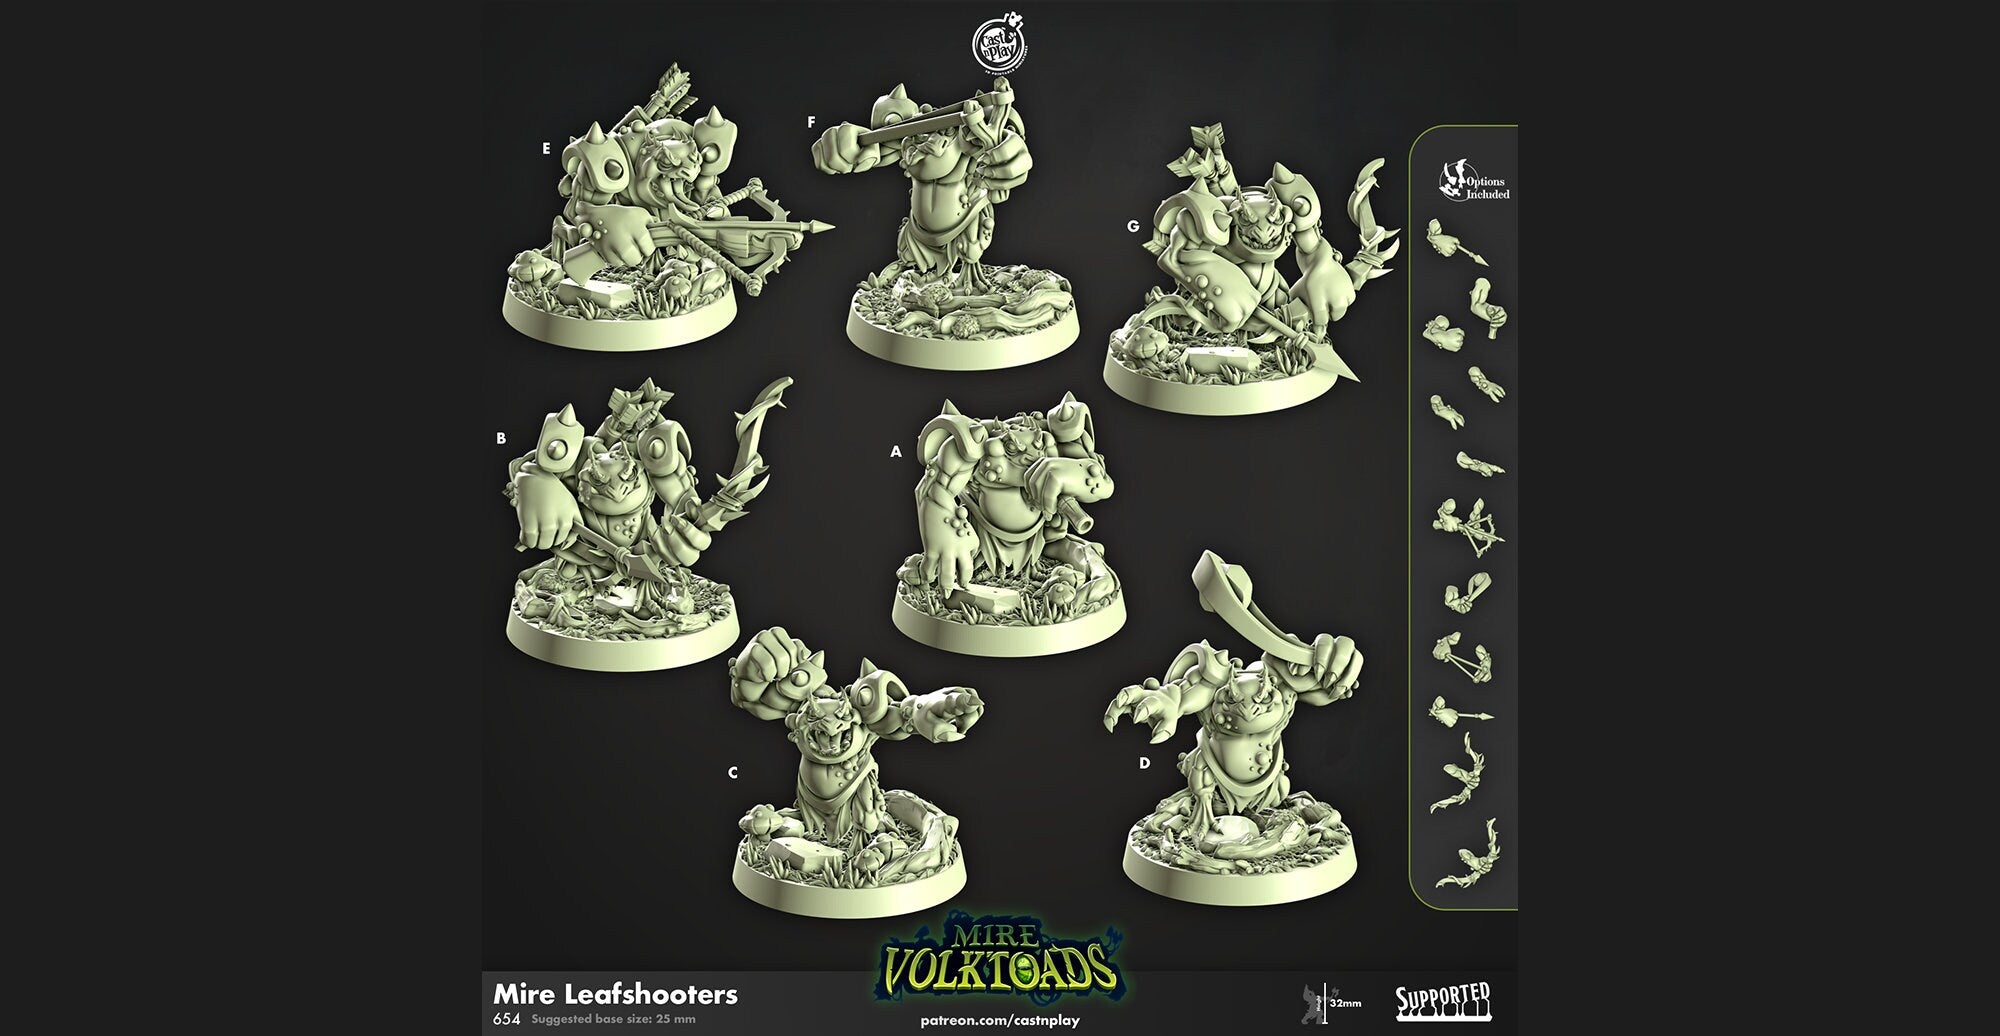 SLAAD "Mire Leafshooters" 7 Versions | Dungeons and Dragons | DnD | Pathfinder | Tabletop | RPG | ttrpg | Wargaming | Warhammer | 28-32 mm-Role Playing Miniatures